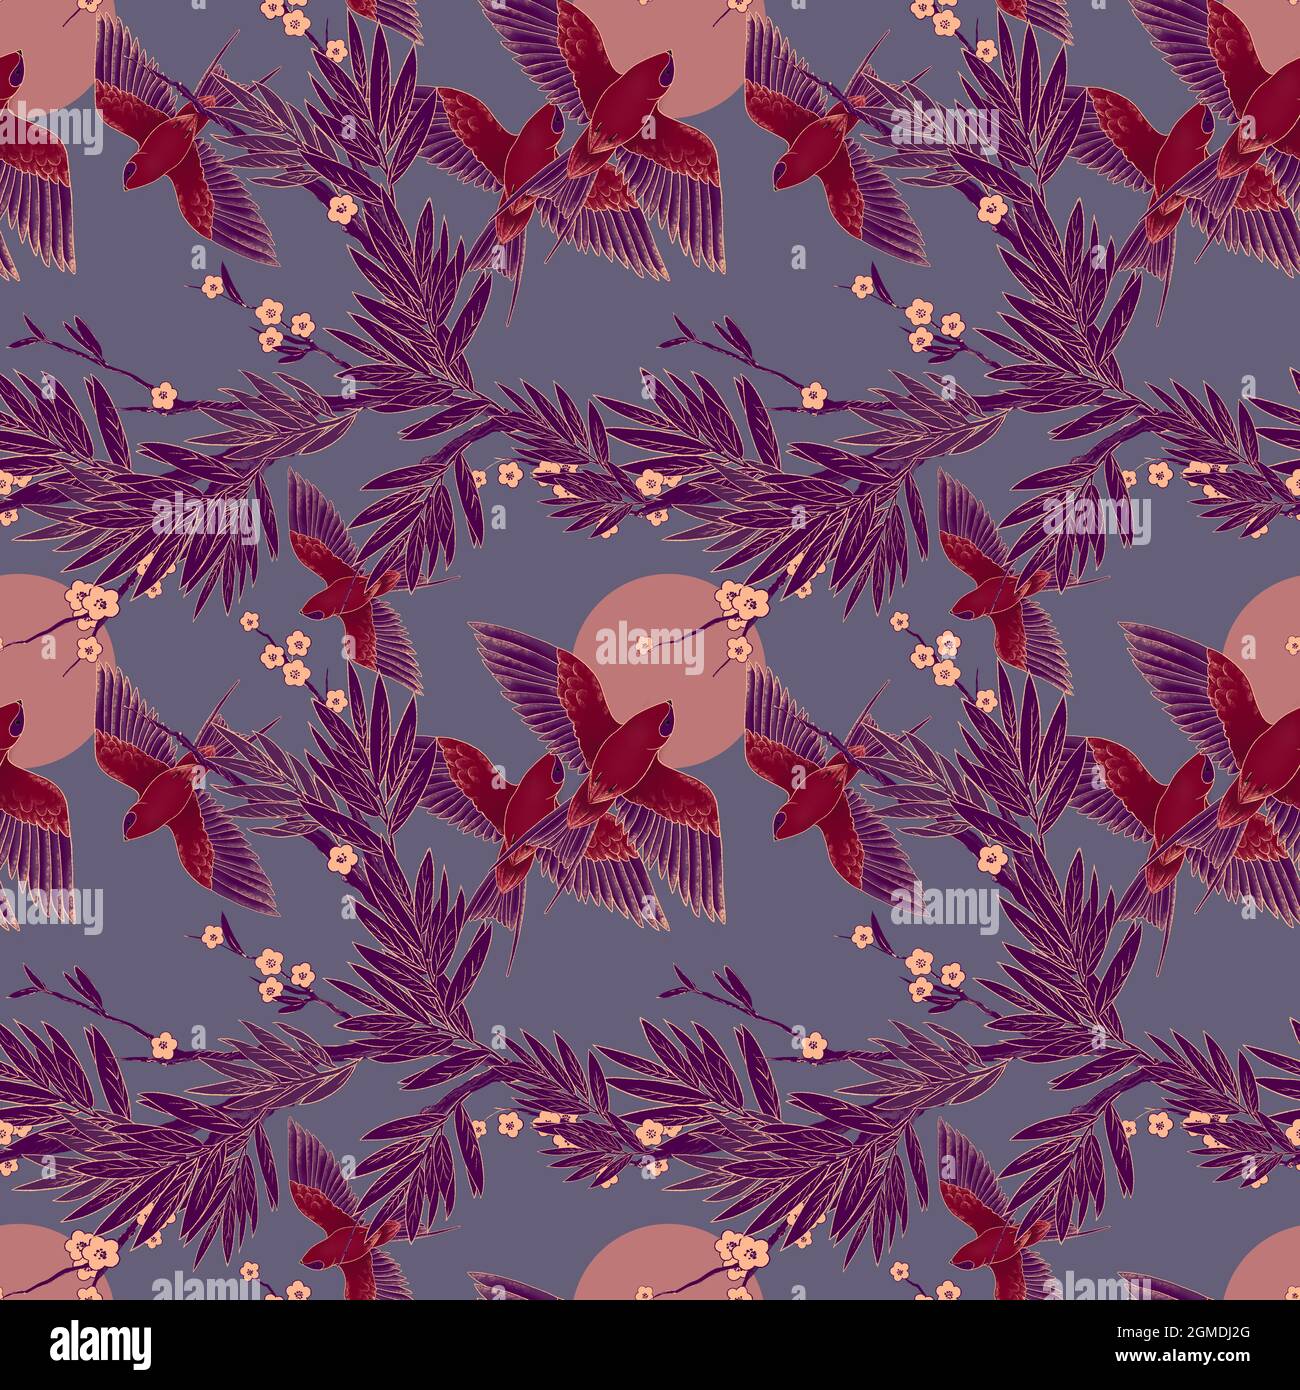 Seamless pattern in chinoiserie style with birds and flowers. Bloom. Chinoiserie inspired. Vintage floral illustration Stock Photo